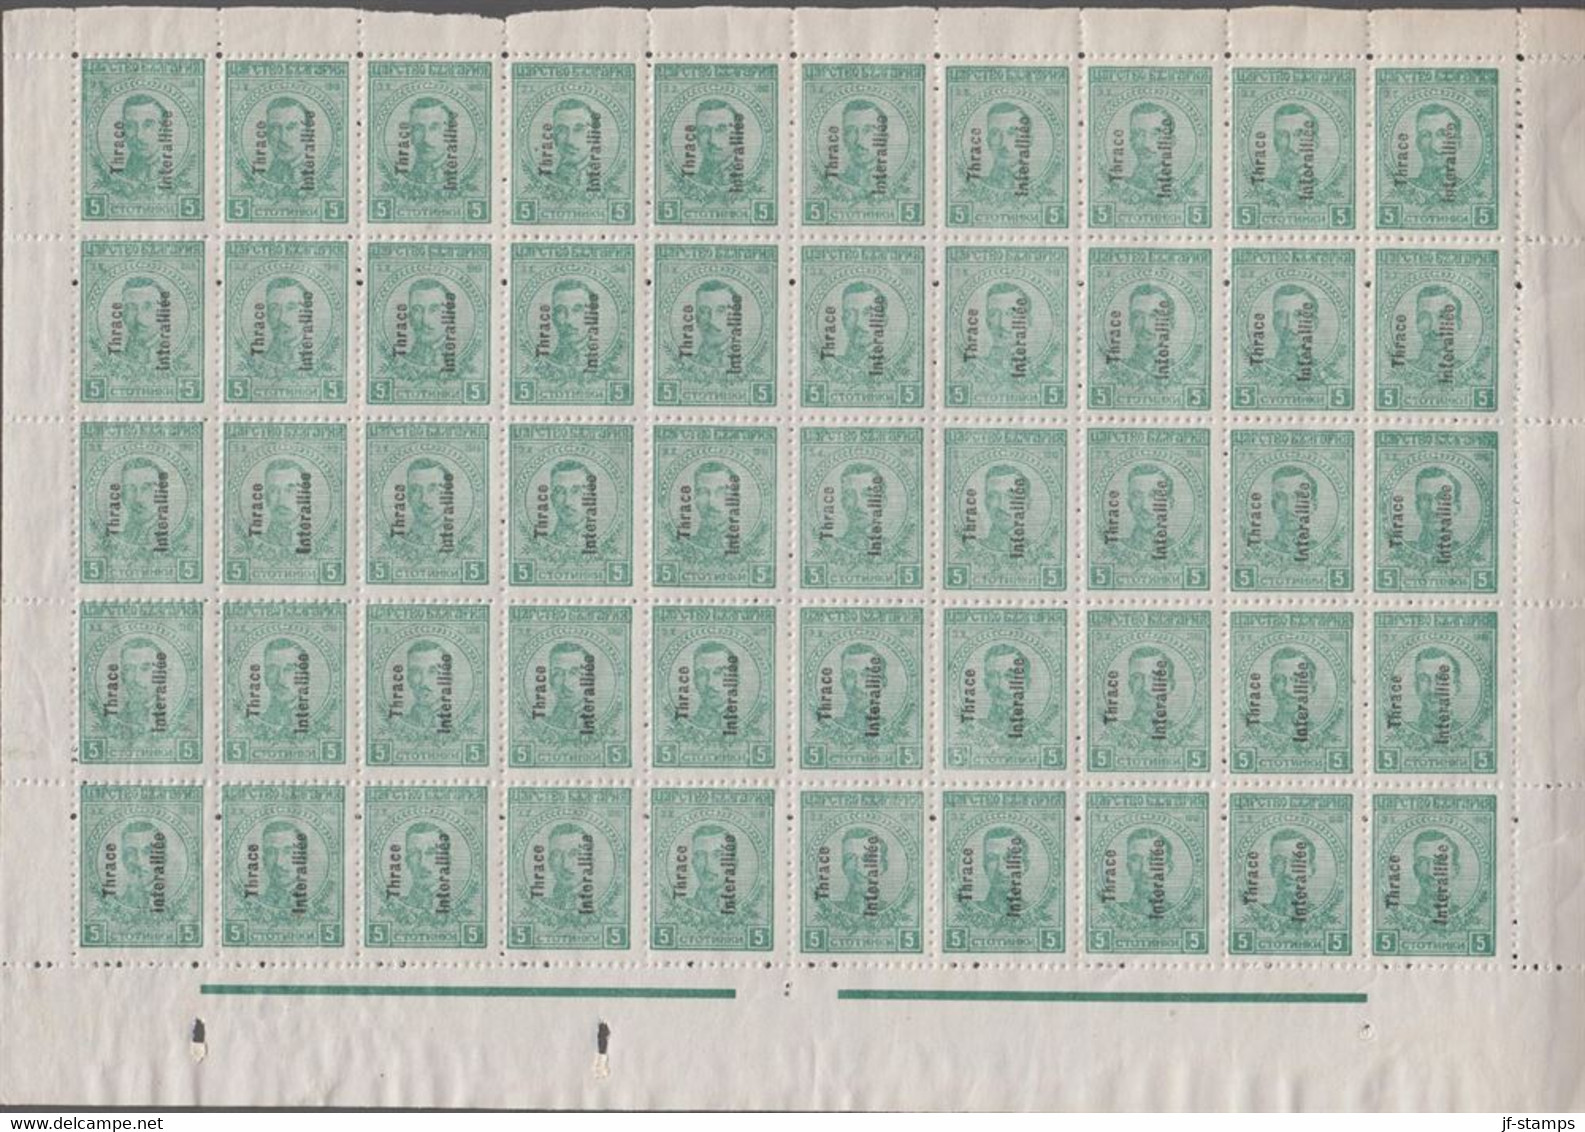 1920. THRACE INTERALLIEE. Bulgarian 5 St In Complete Sheet With 50 Stamps With Overprint Thrac... (Michel 16) - JF527354 - Thrakien